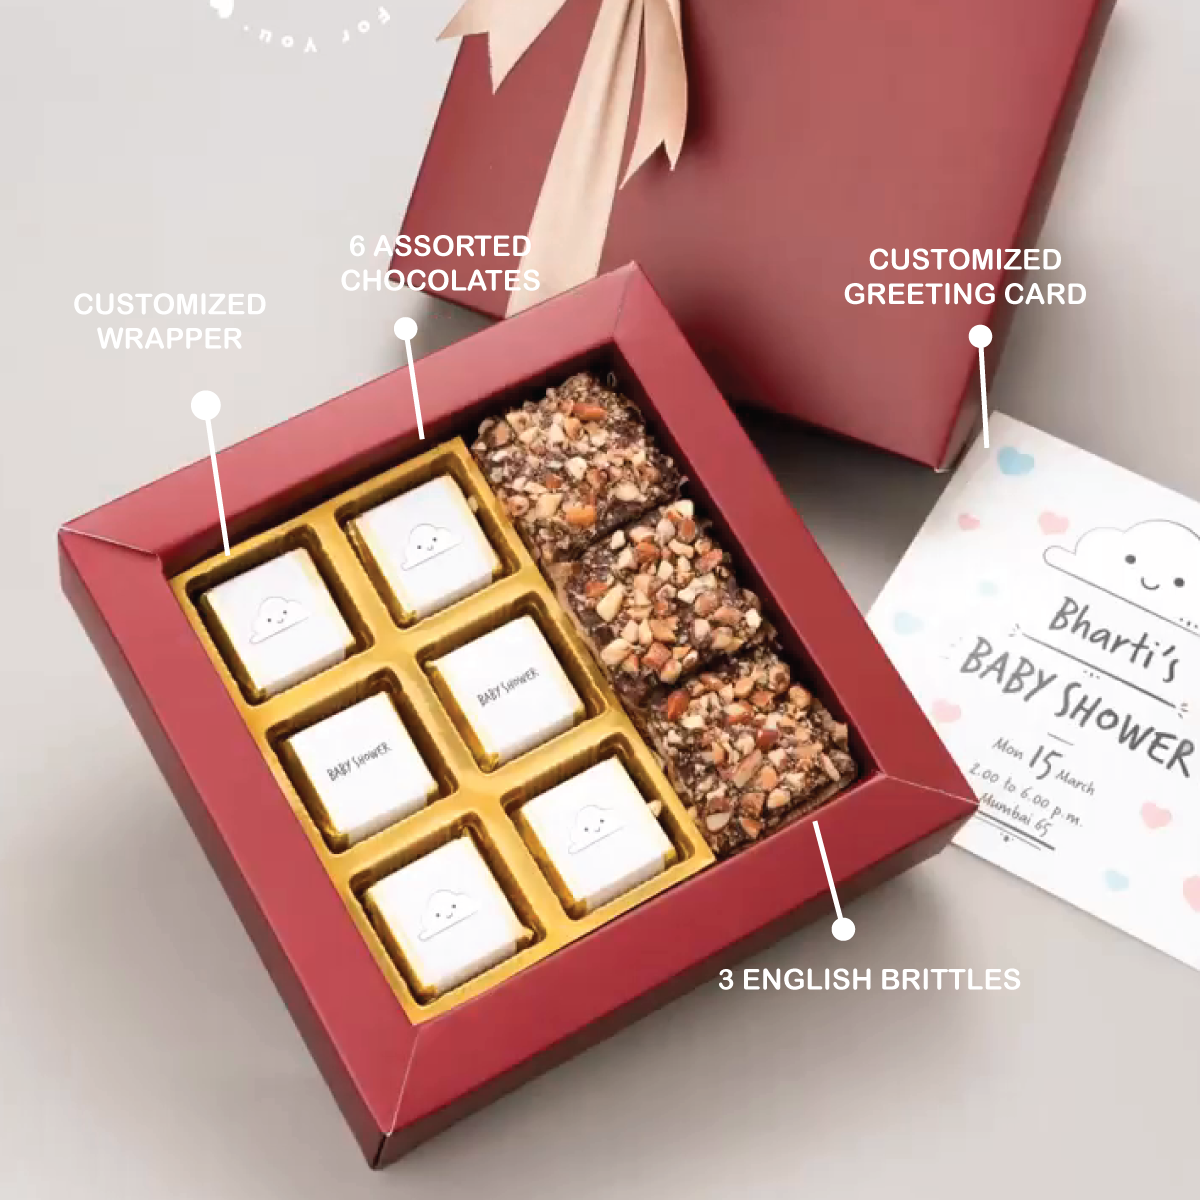 Customized Chocolate Wrapper with Greeting Message Chocolates, and English Brittles Combo Gift Set - For Employees, Dealers, Customers, Stakeholders, Personal or Corporate Diwali Gifting CV21